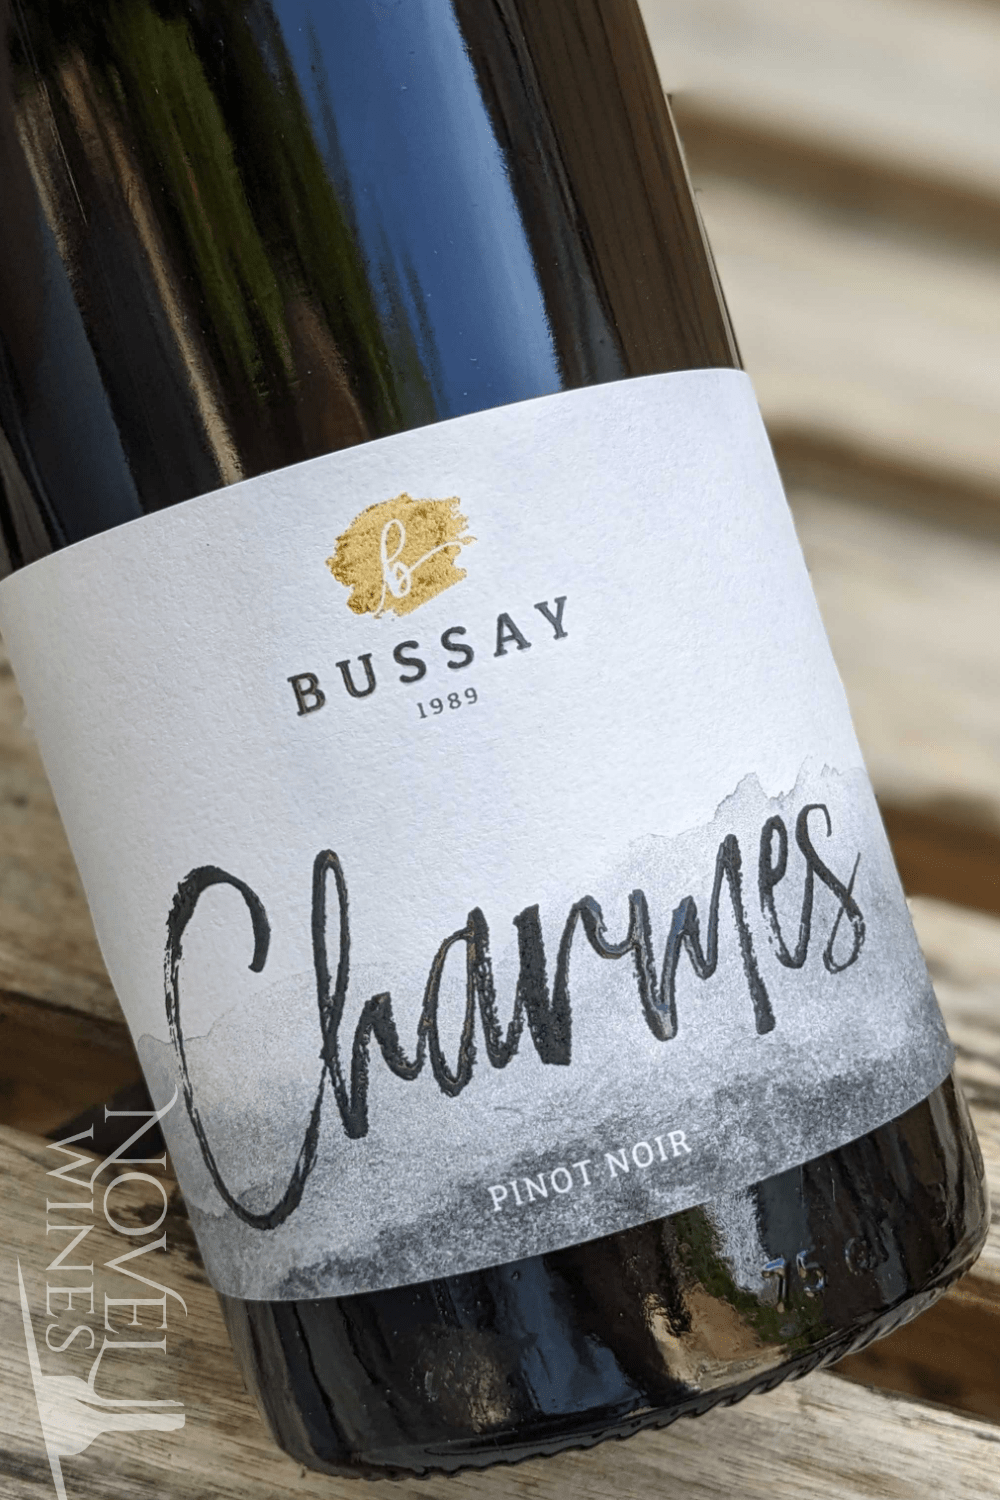 Bussay Red Wine Bussay Charmes Pinot Noir 2018, Hungary